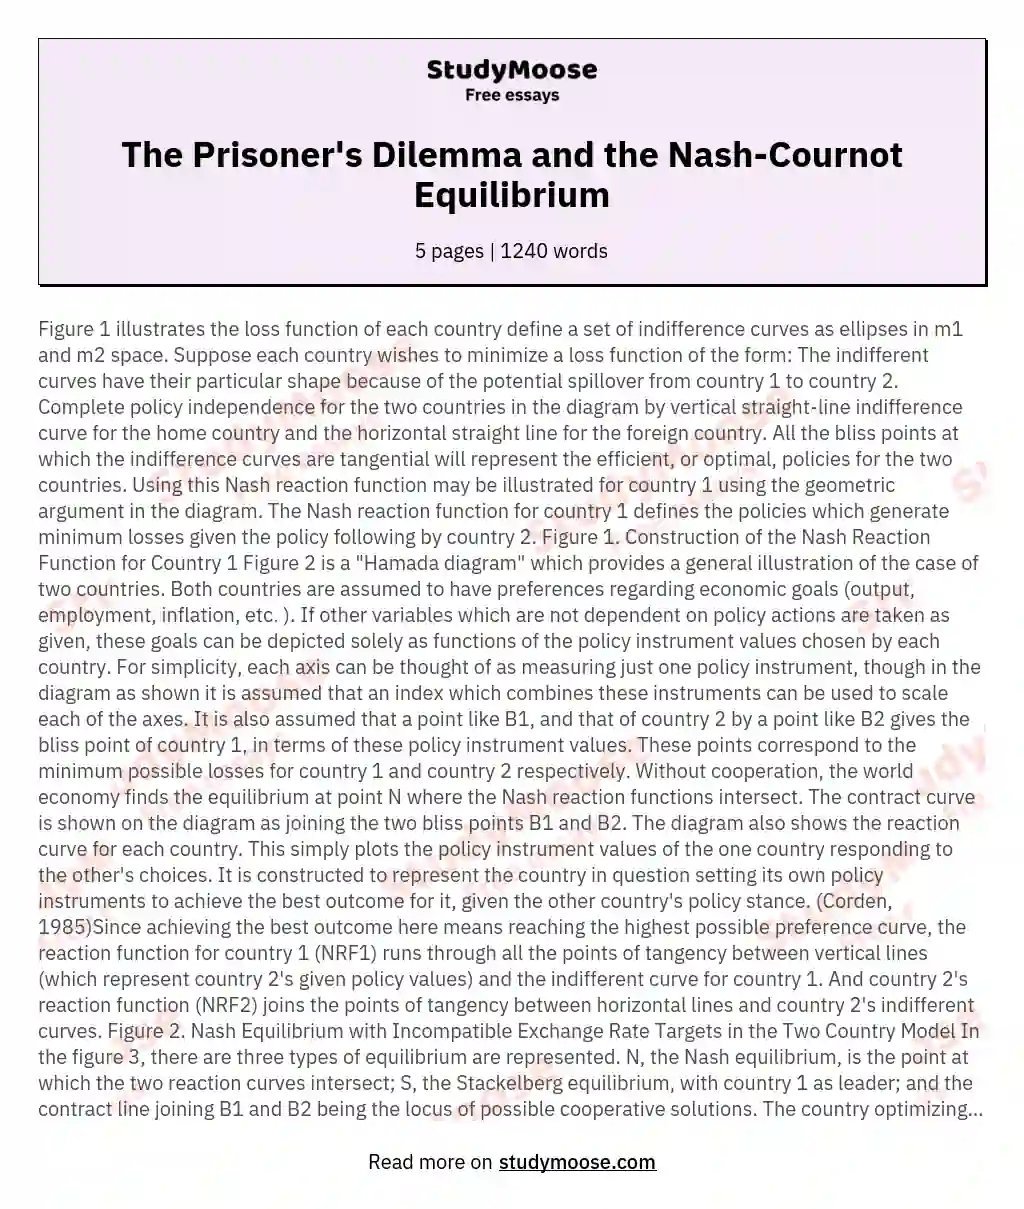 The Prisoner's Dilemma and the Nash-Cournot Equilibrium